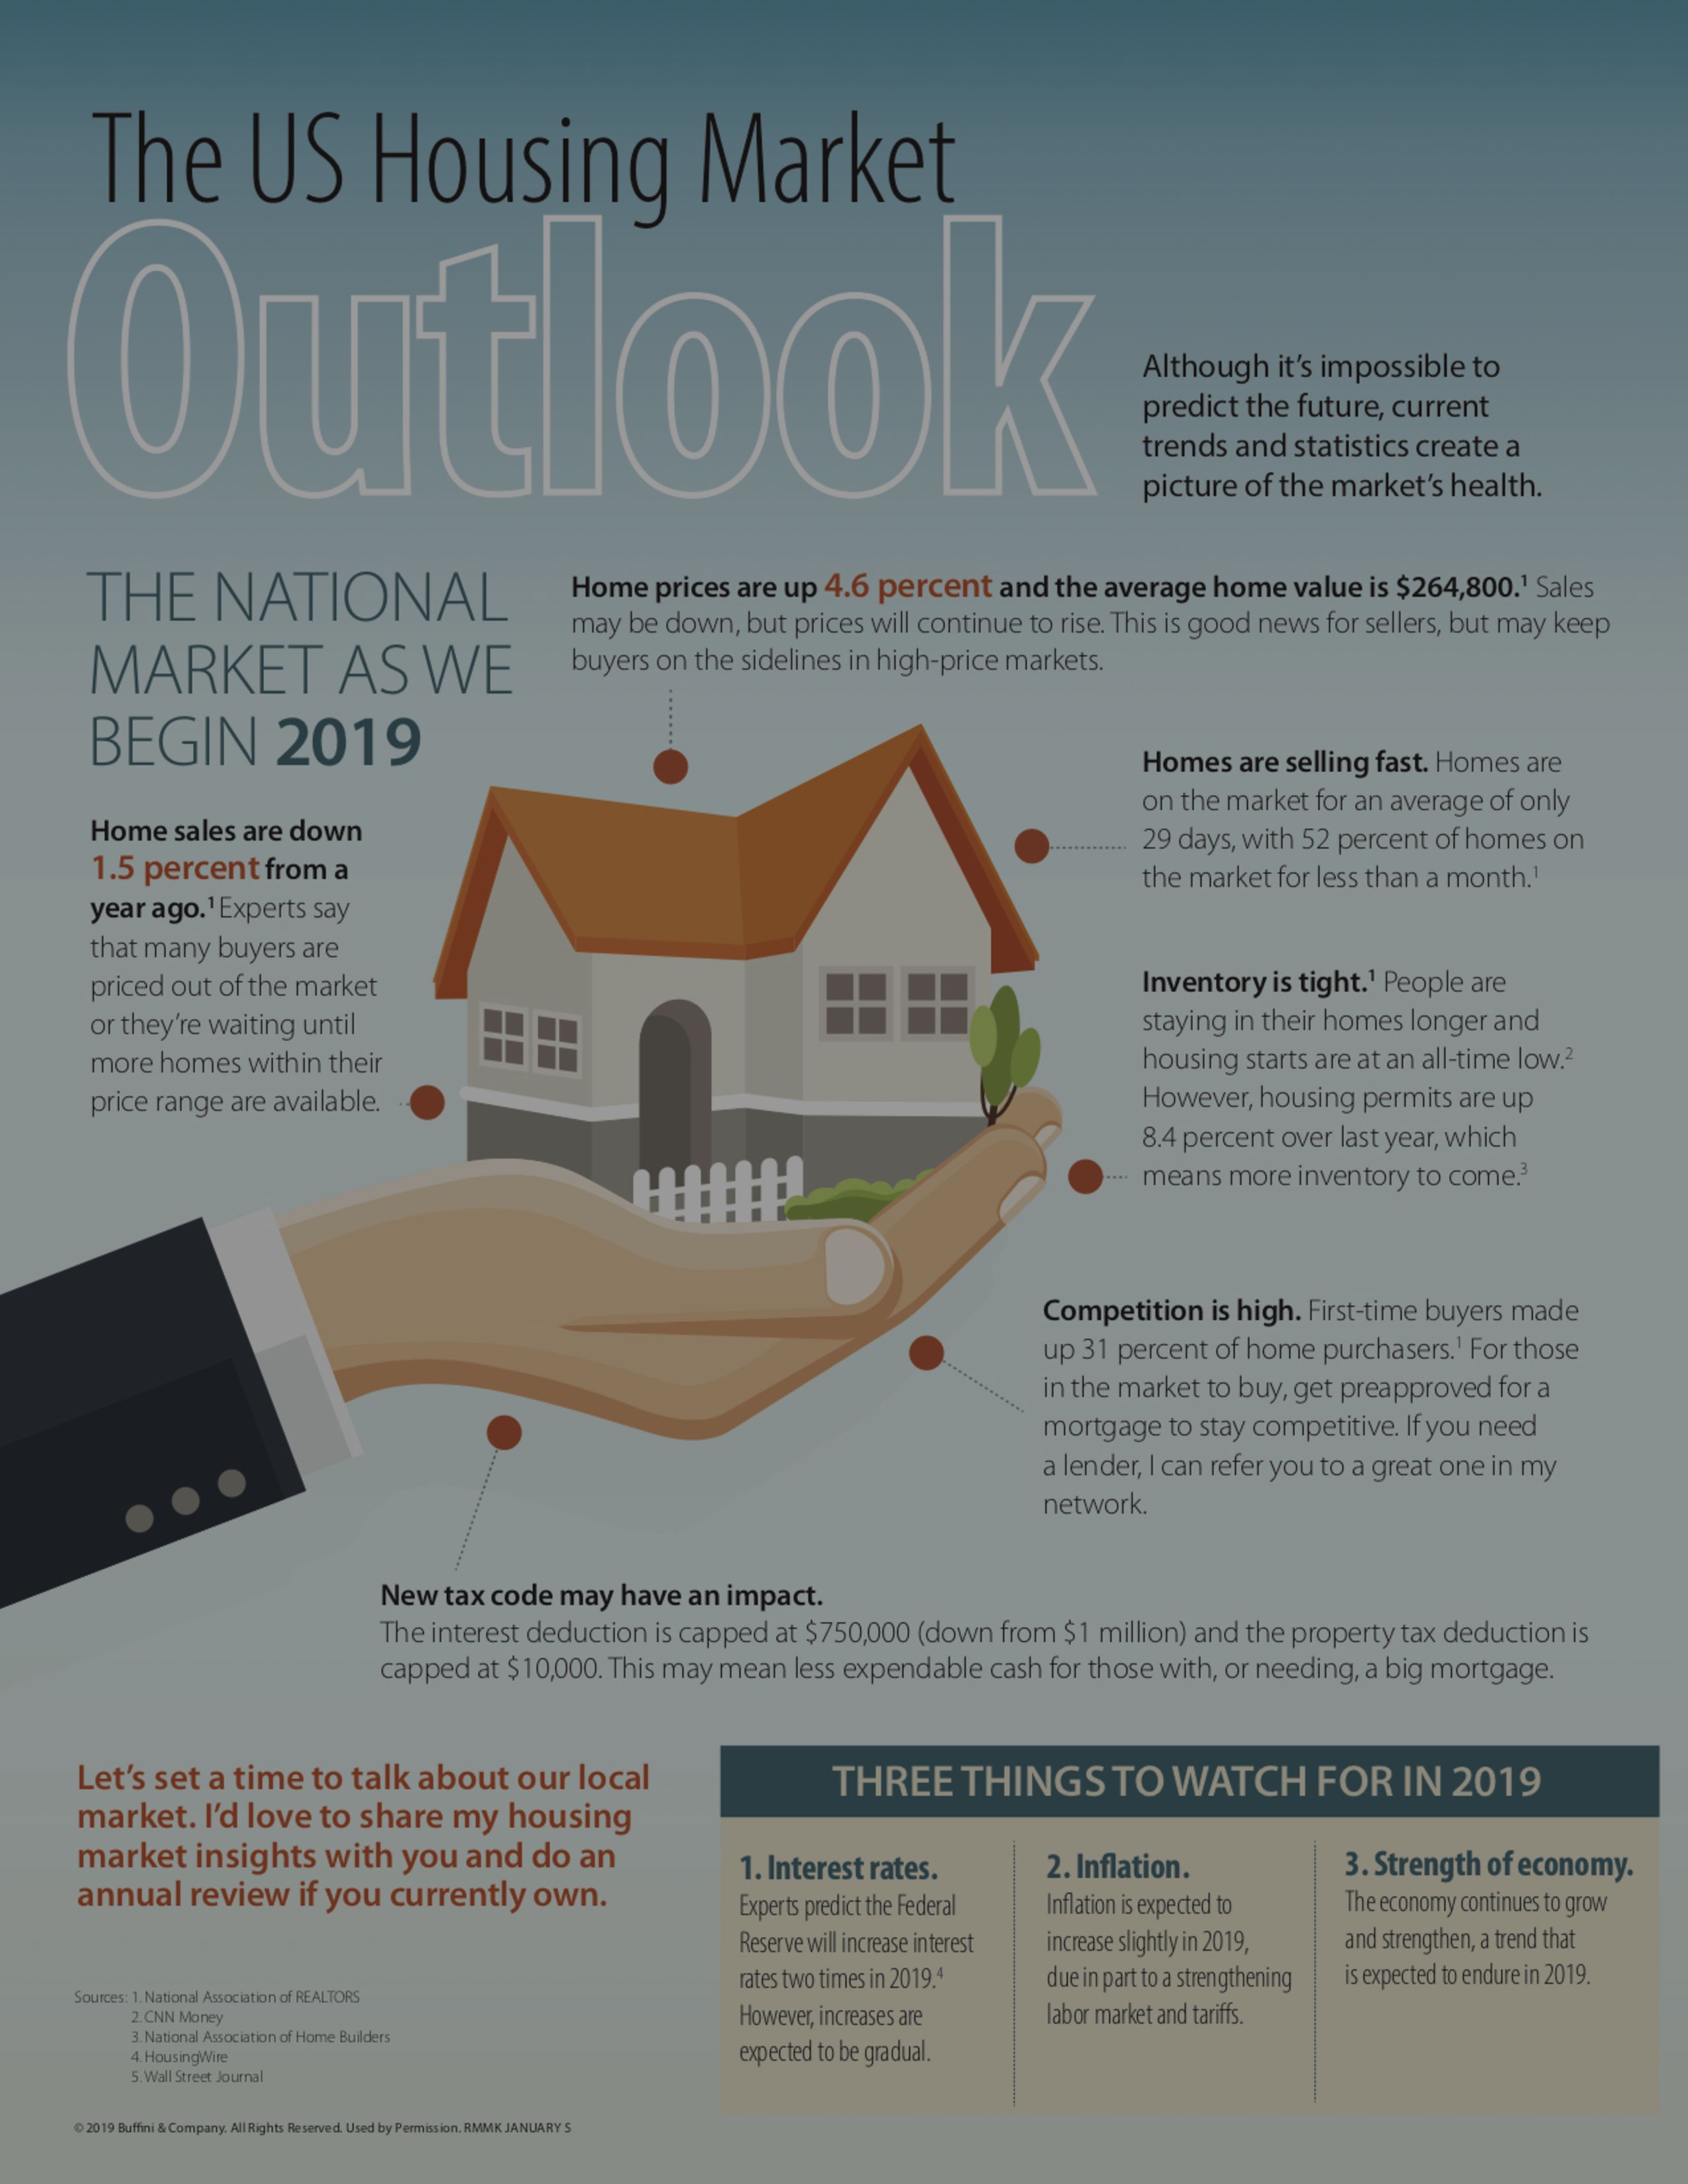 The US Housing Market Outlook